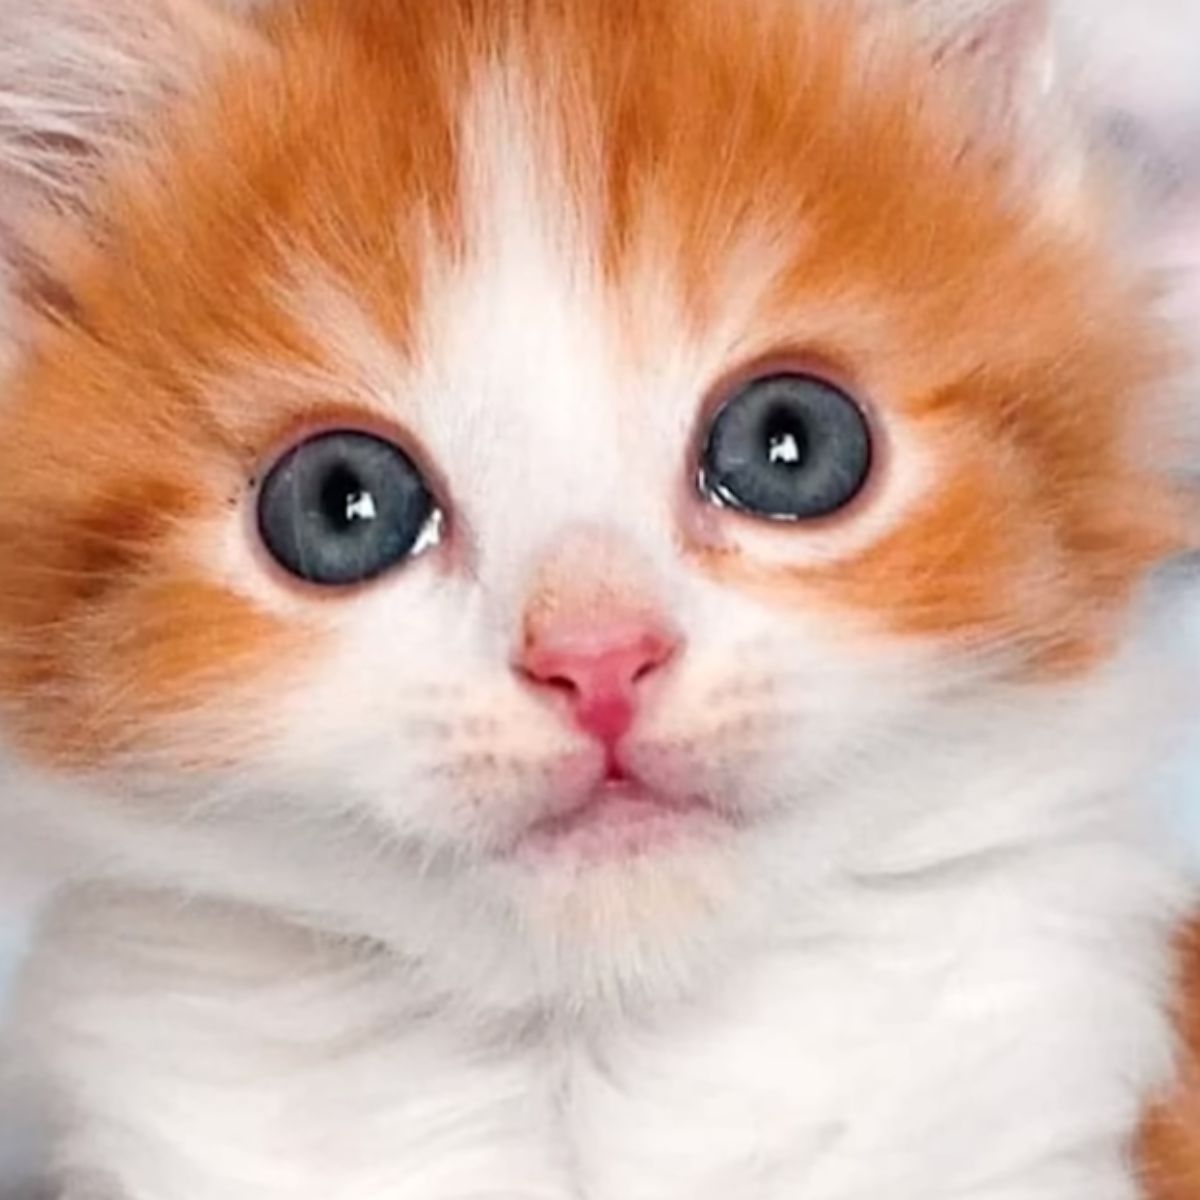 close-up photo of the kitten